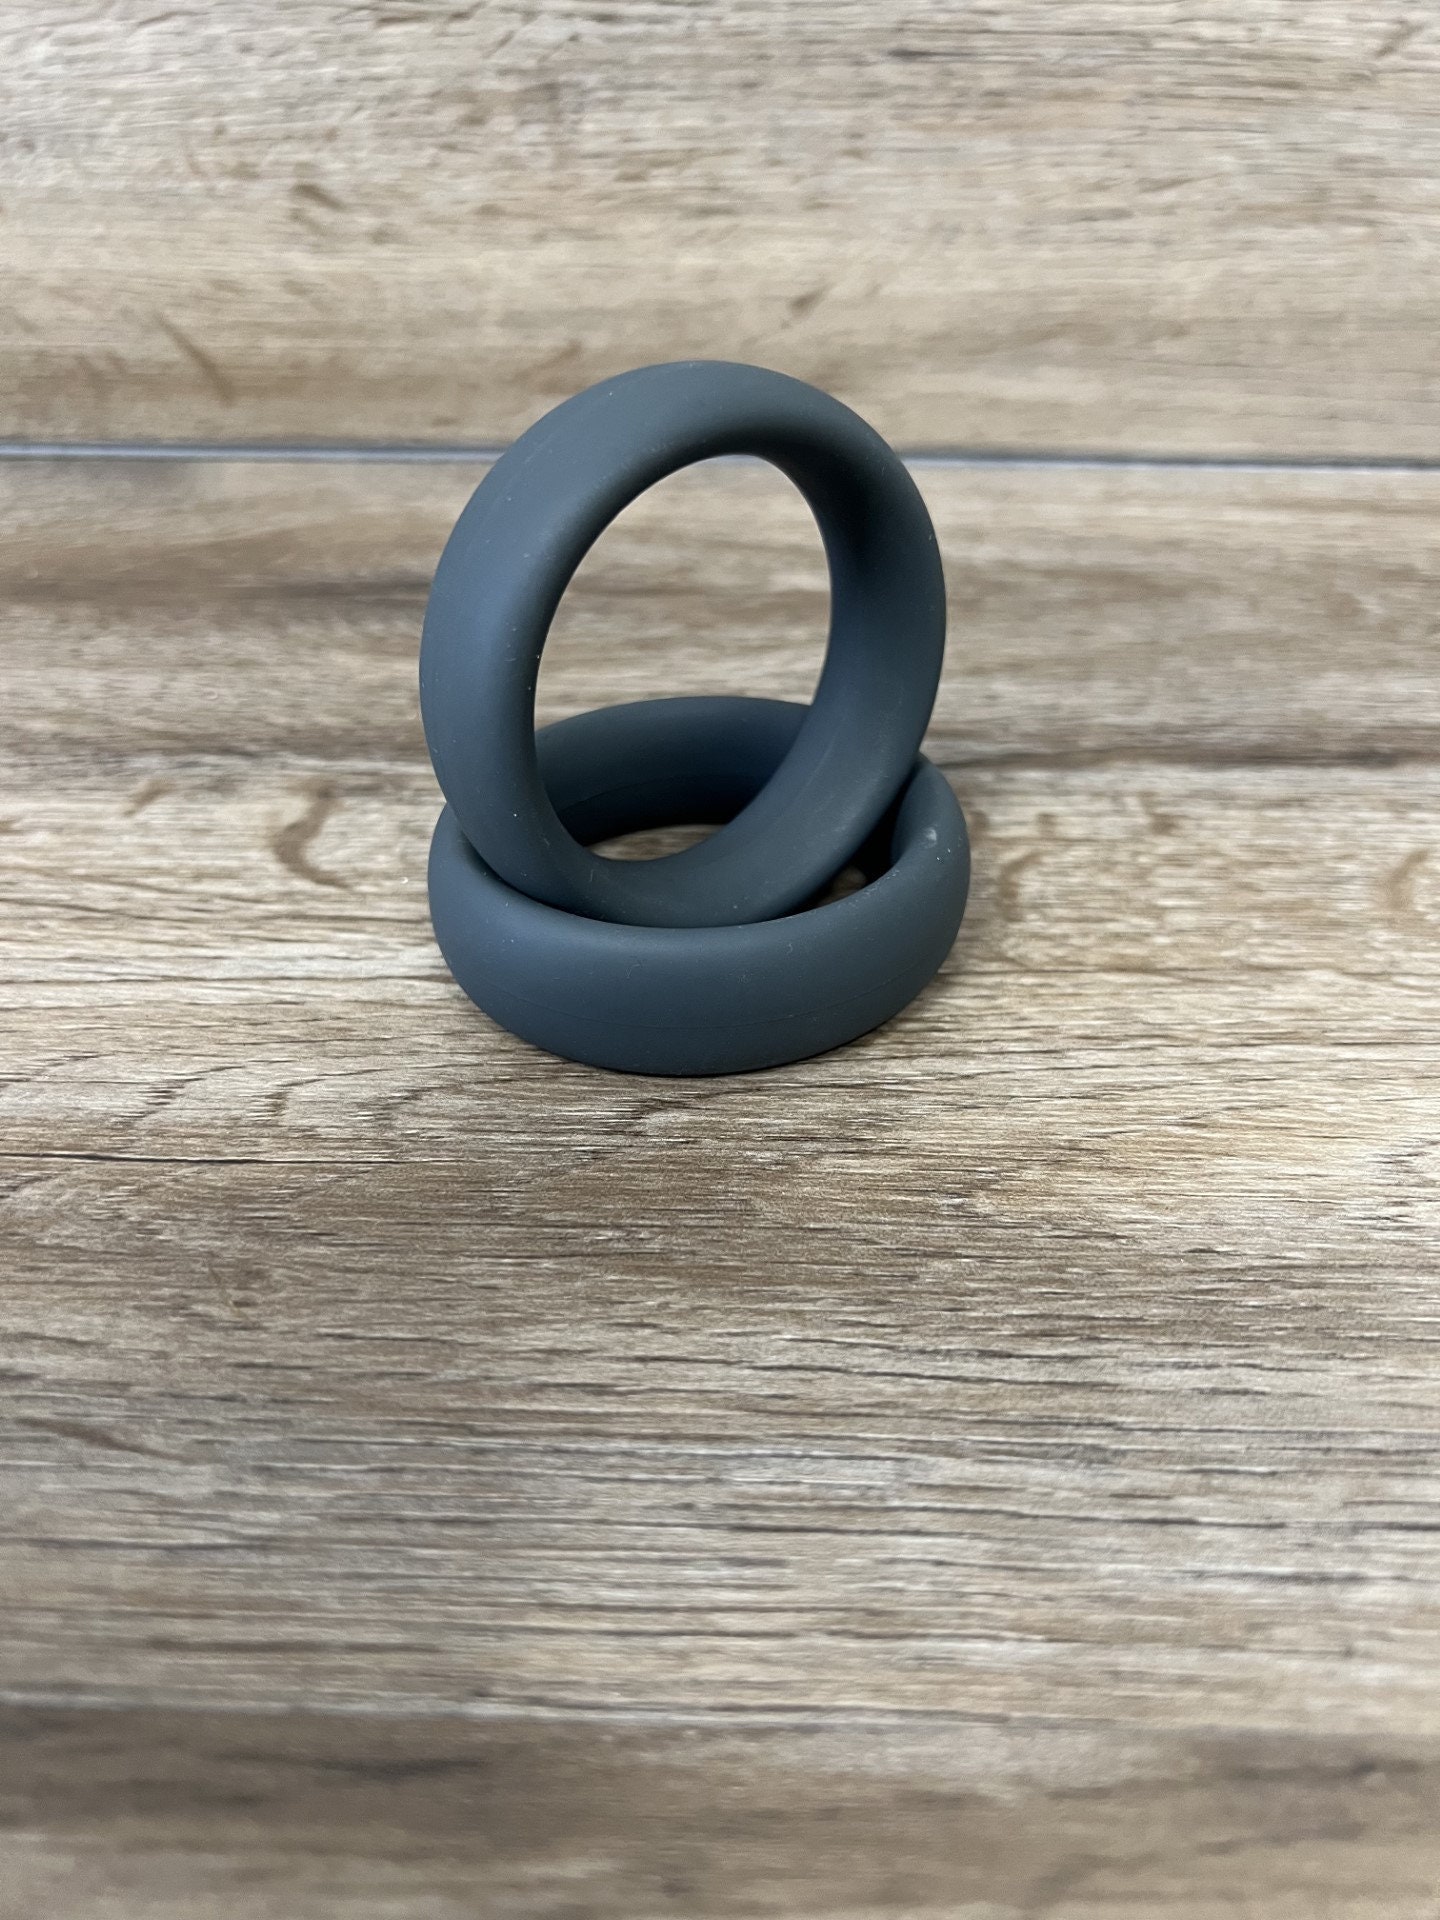 Buy OptiMale Silicone C-Ring - 40 mm - Black at